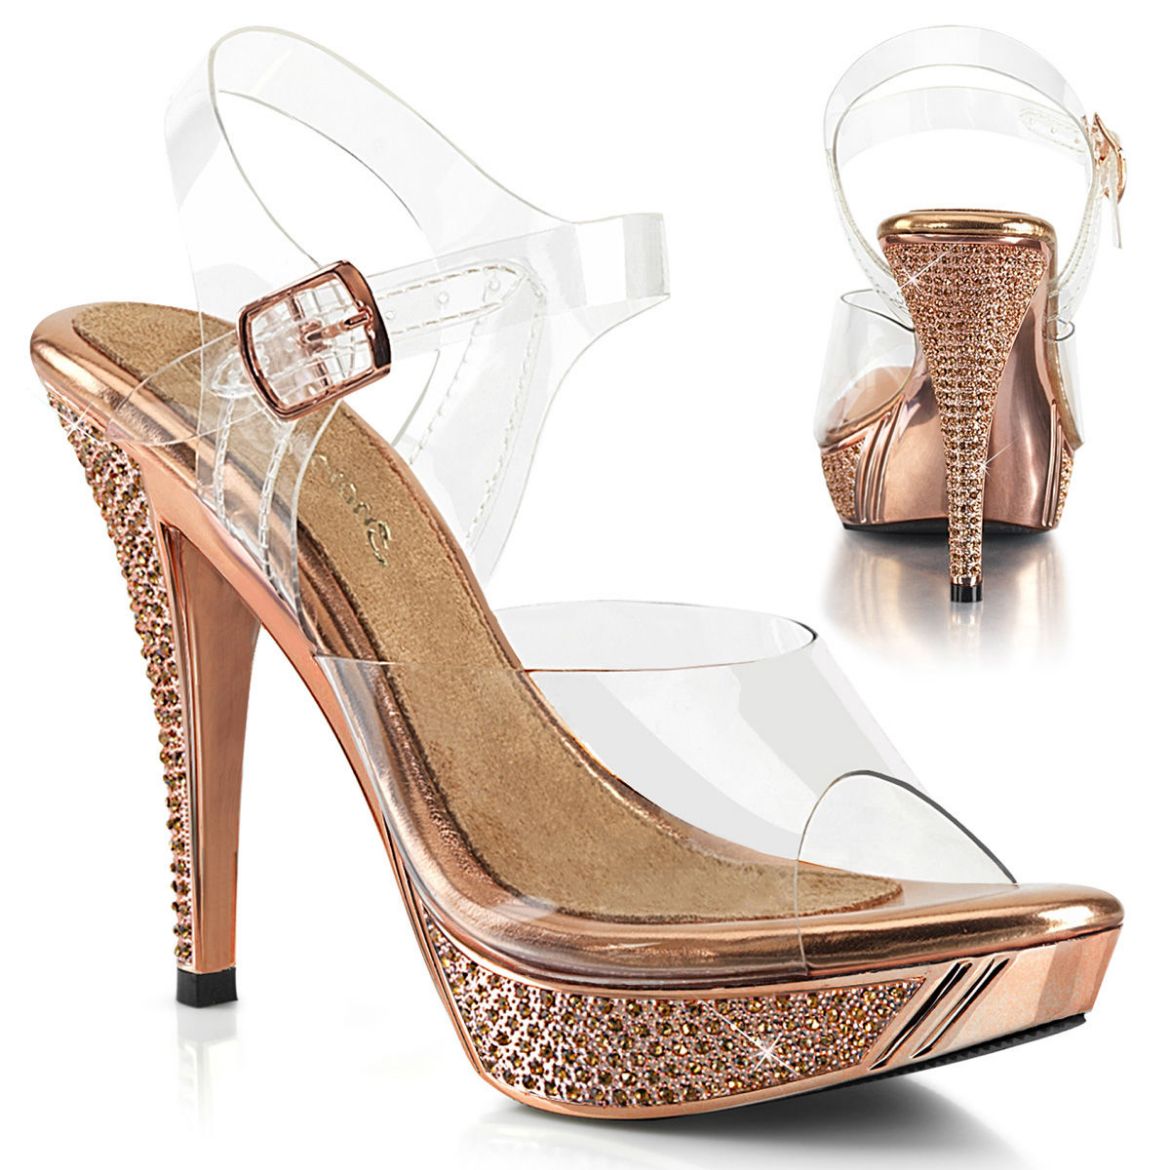 Product image of Fabulicious ELEGANT-408 Clear-Rose Gold/Rose Gold Chrome 4 1/2 inch (11.4 cm) Heel 1 inch (2.5 cm) Platform Ankle Strap Sandal With Rhinestones Shoes